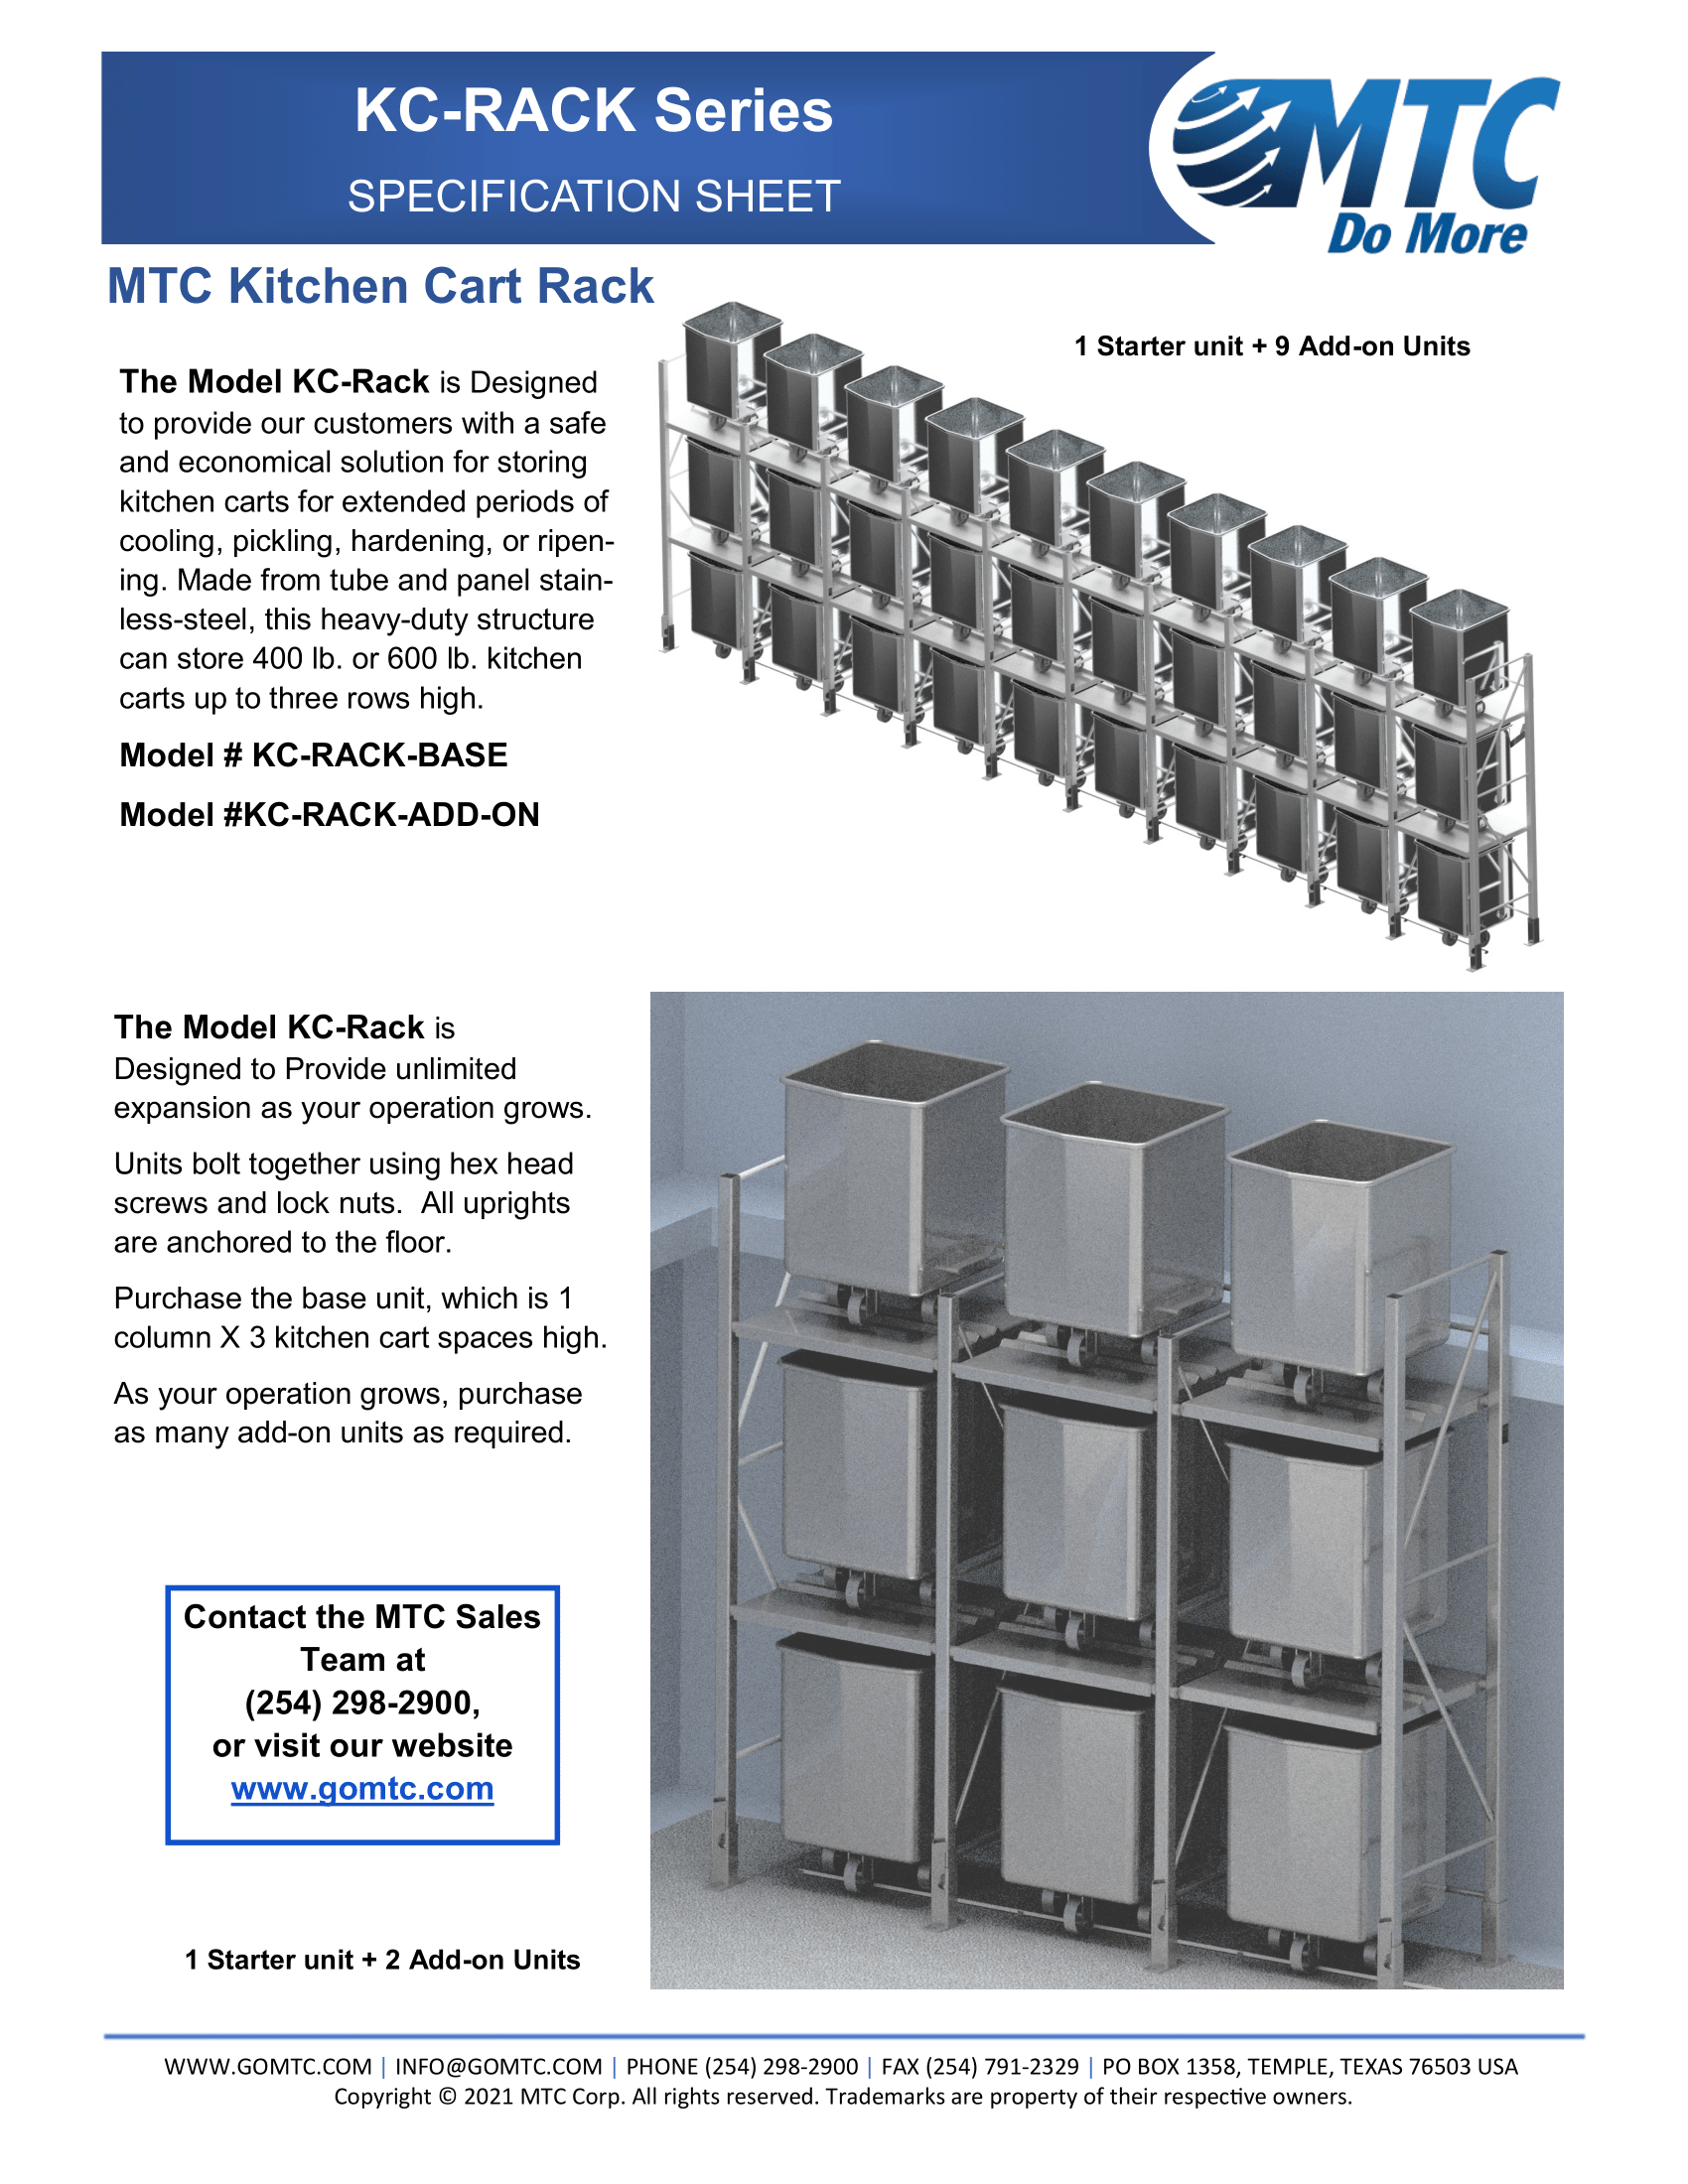 MTC Brochure for the Kitchen Cart rack - front cover